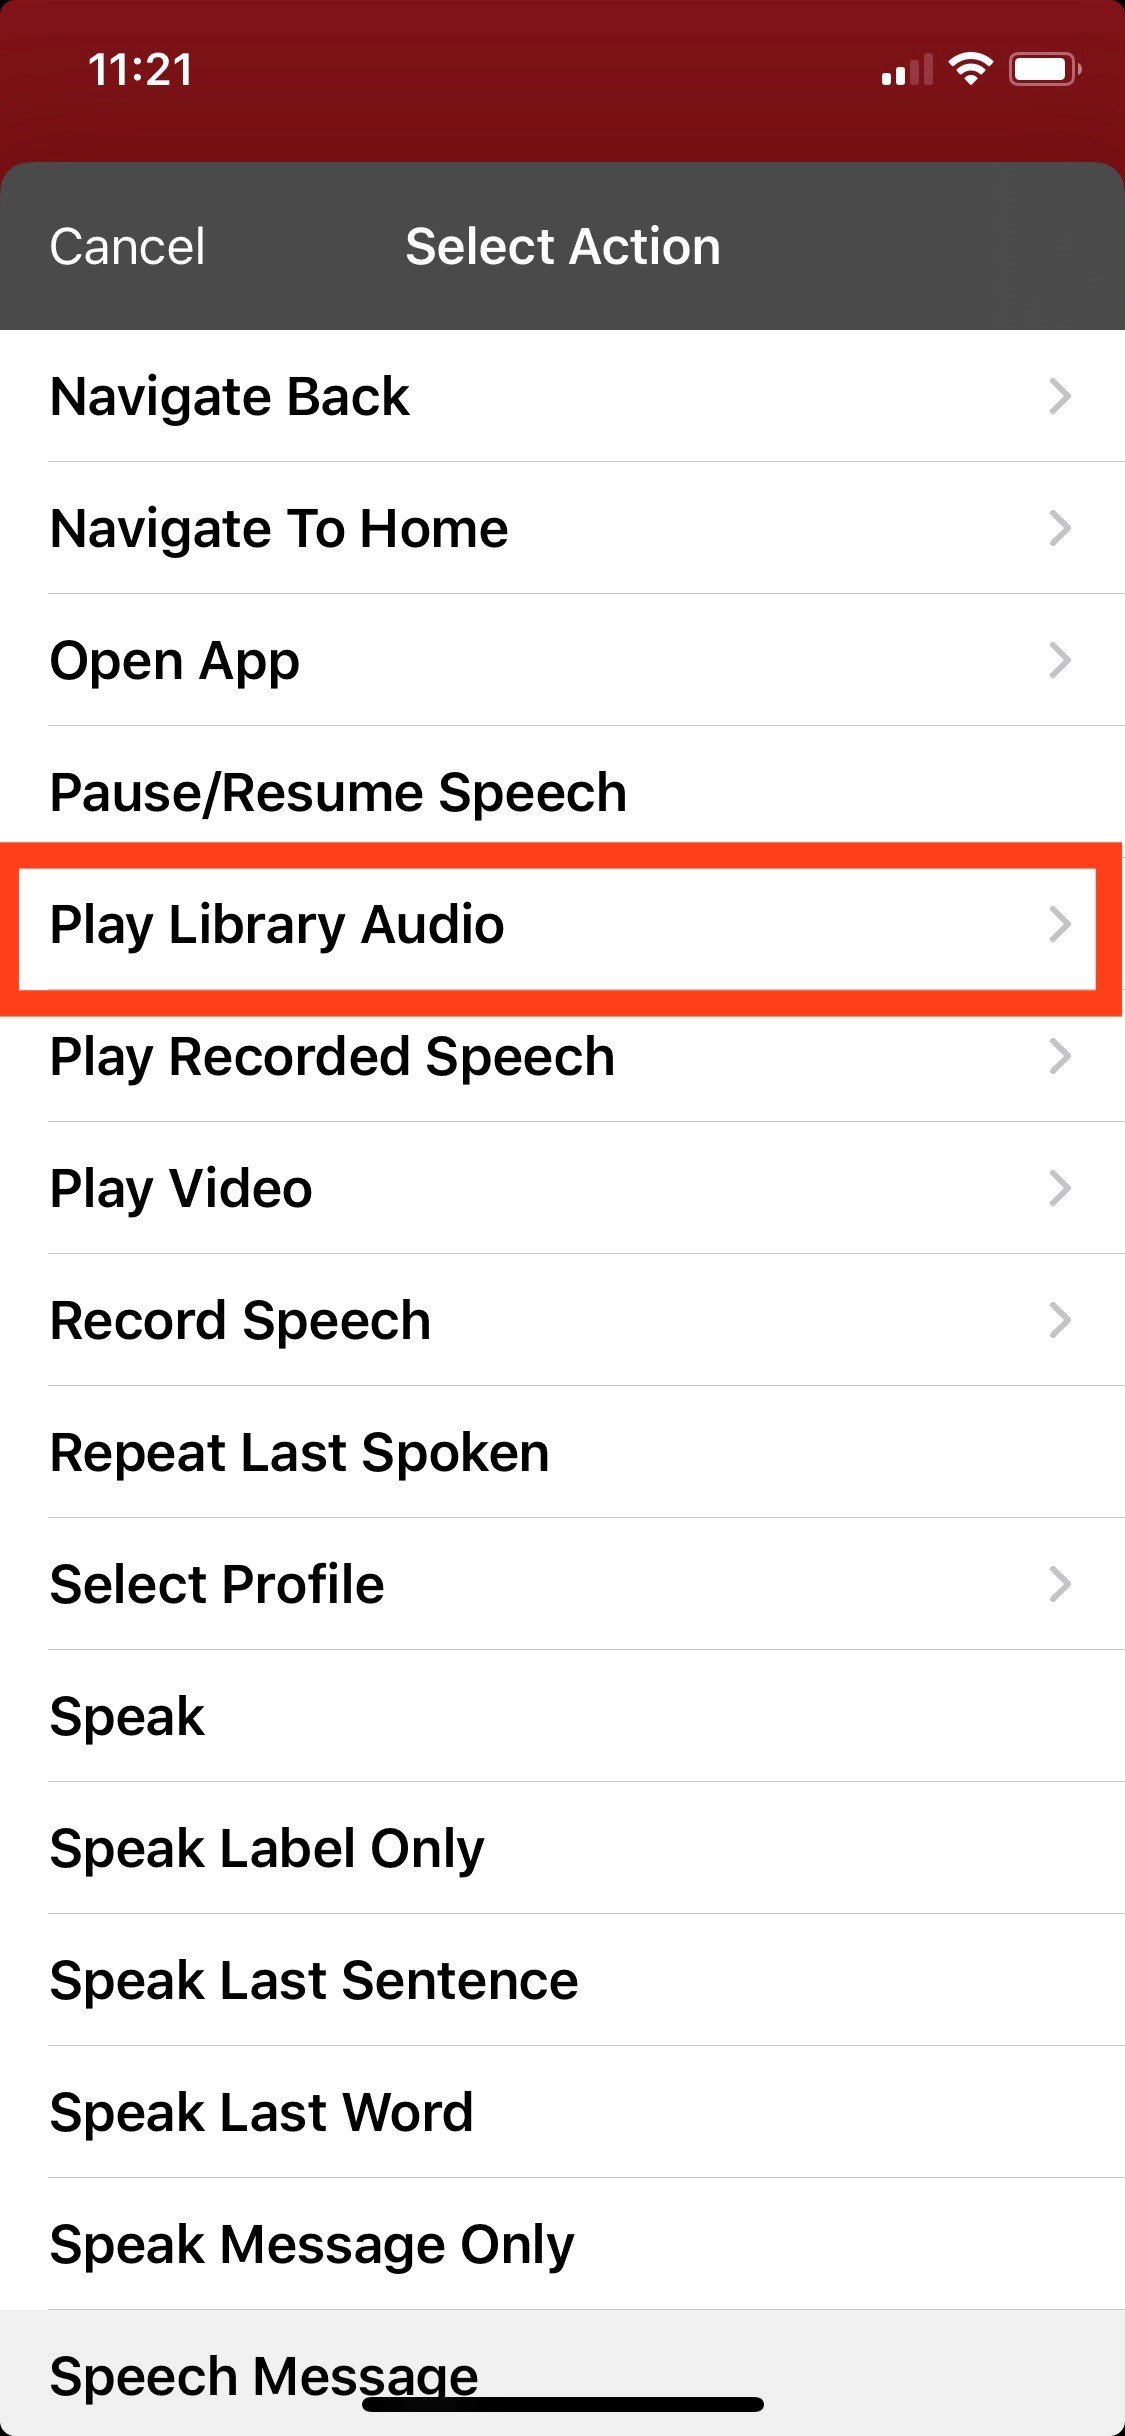 Play Library Audio